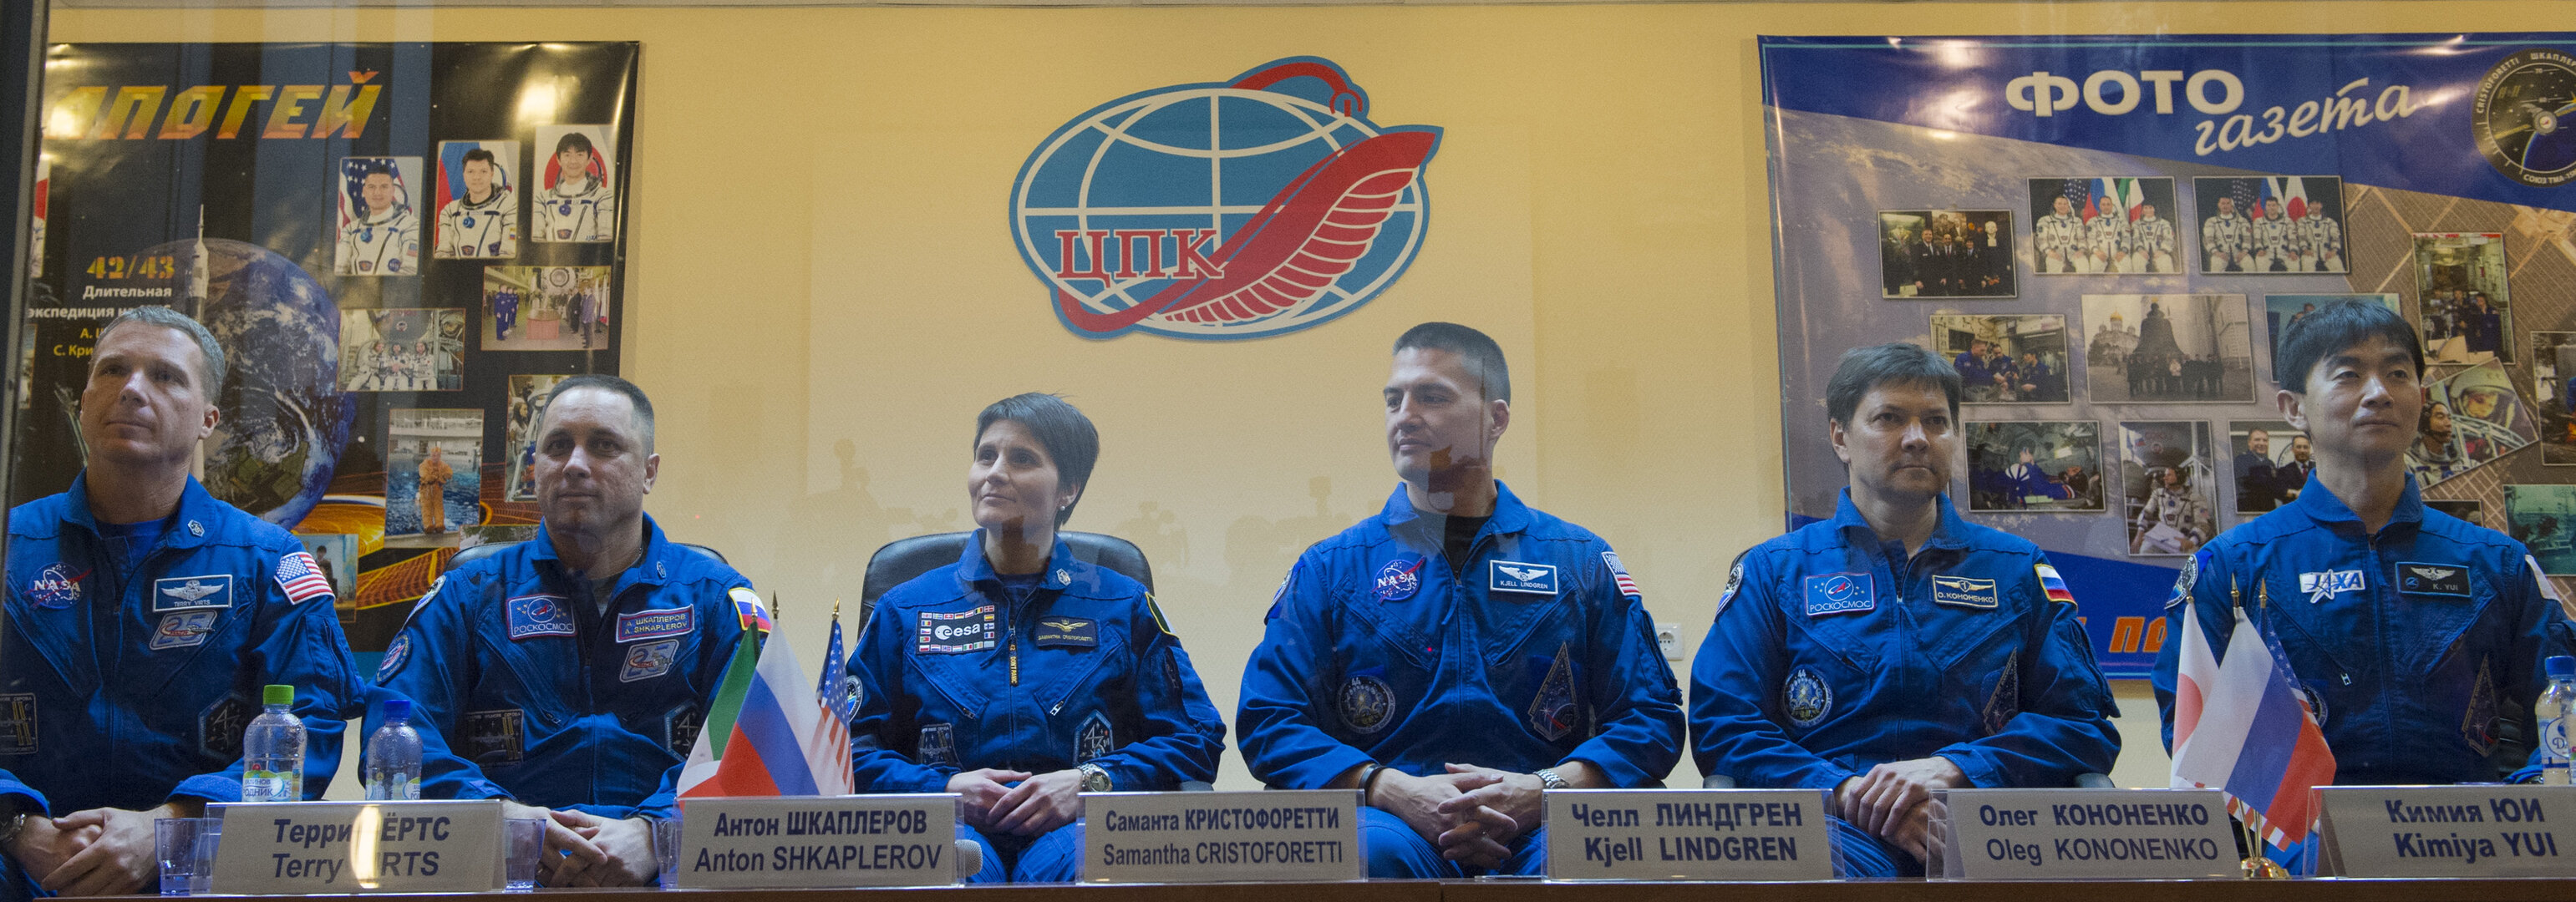 Expedition 42/43 press conference